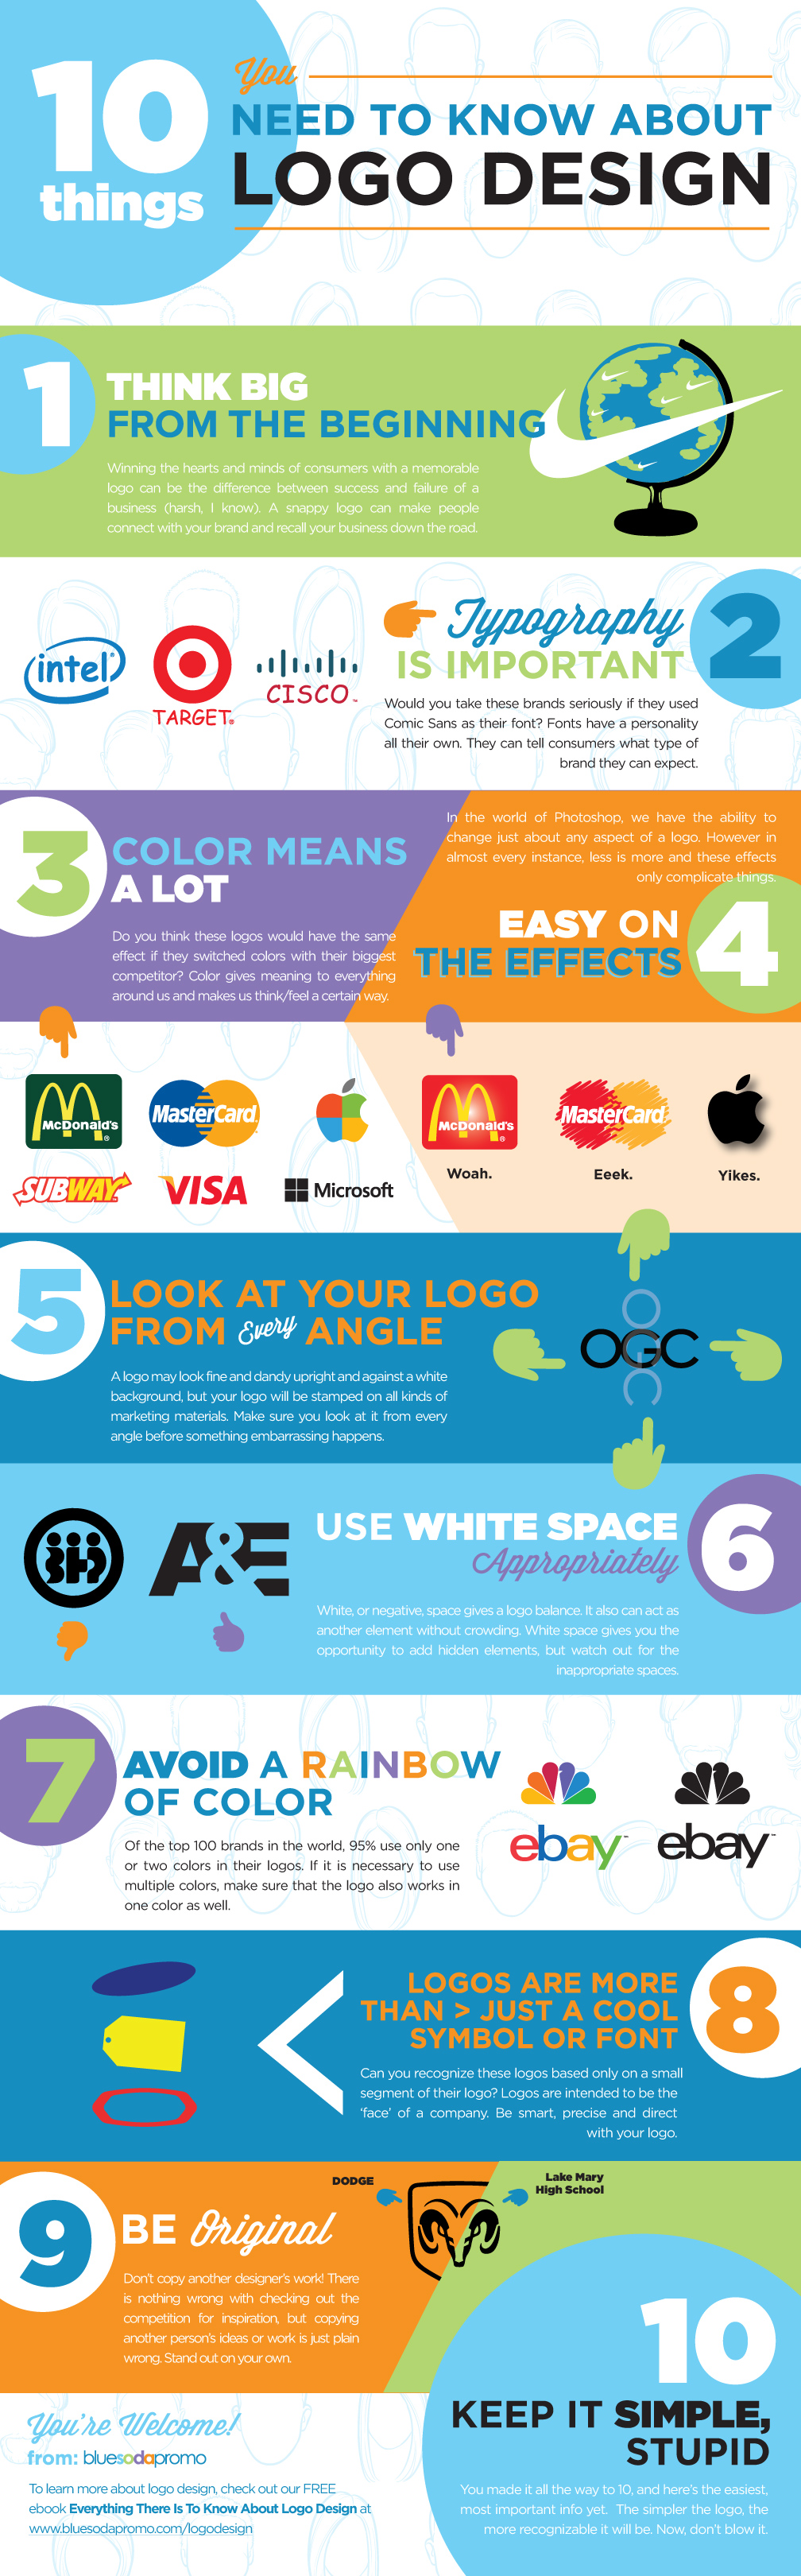 10 Things You Need to Know About Logo Design